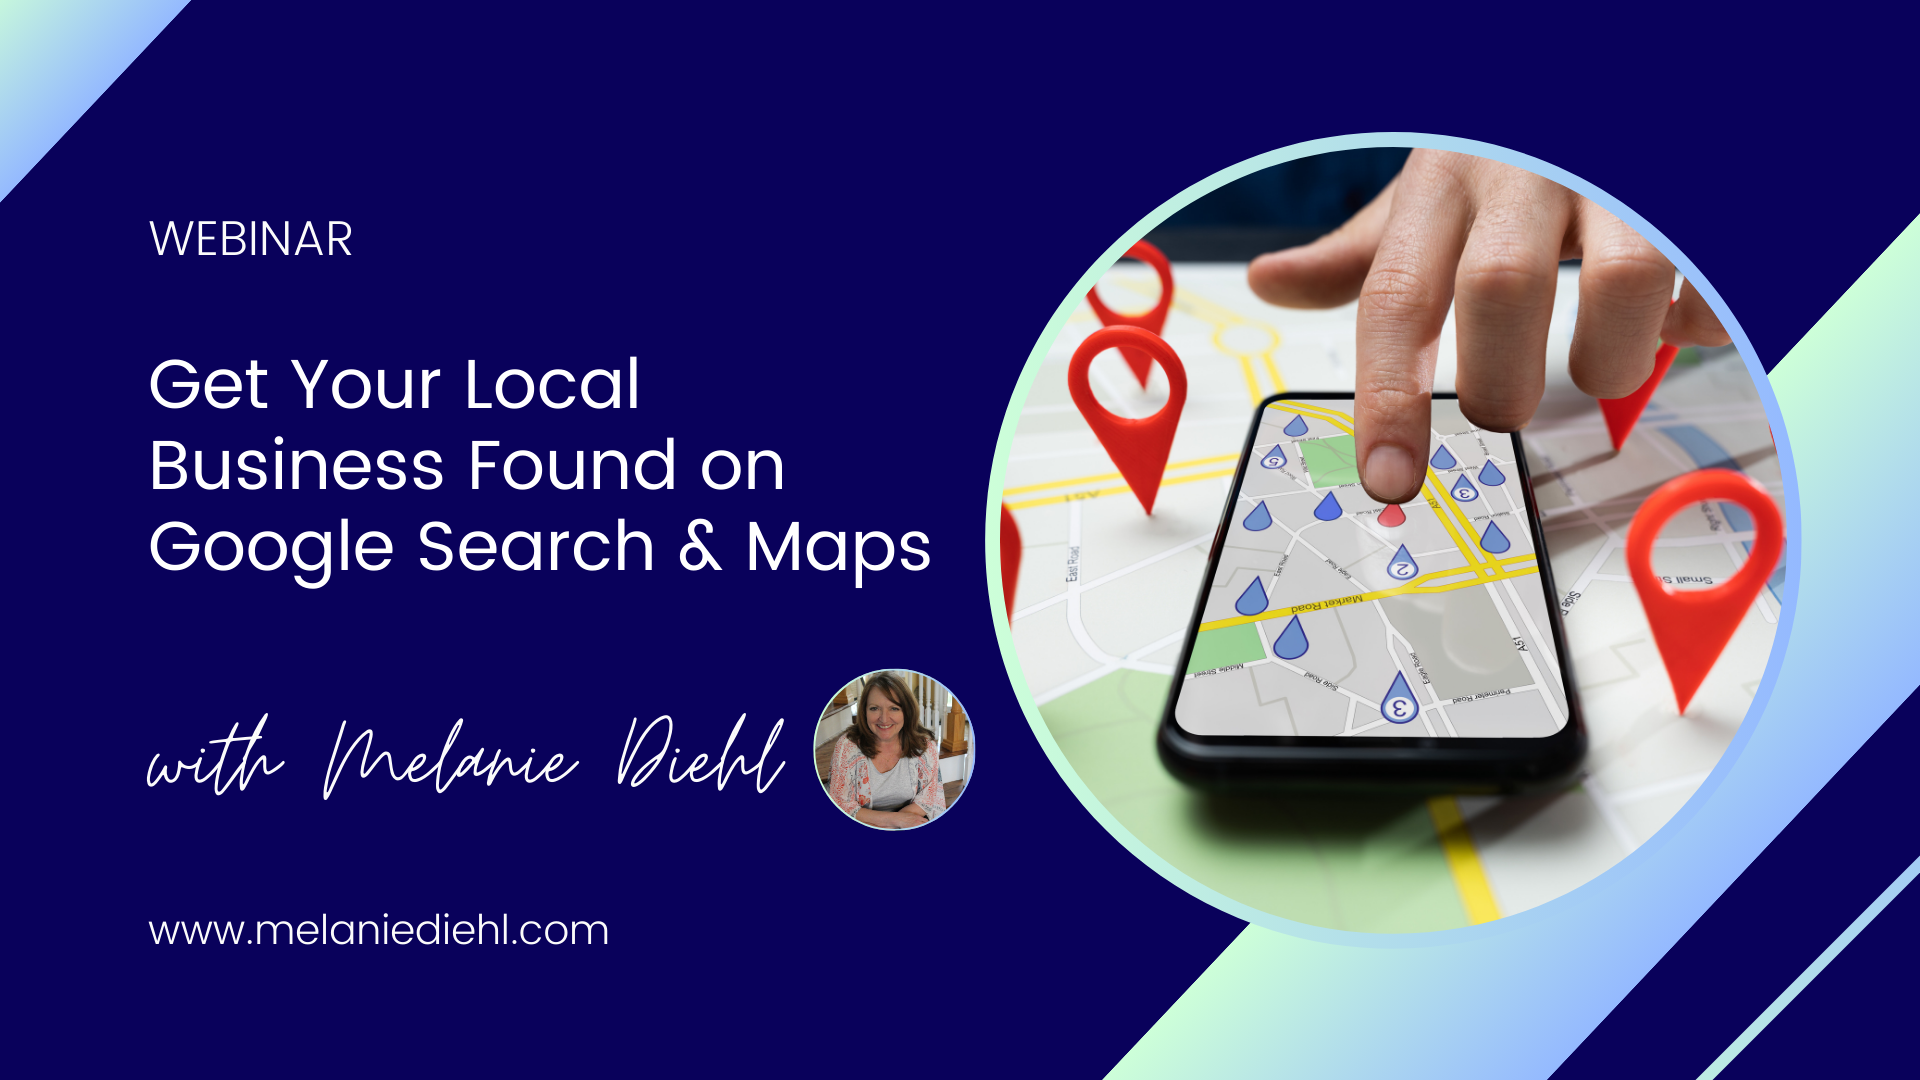 Get Your Business Found on Google Search & Maps